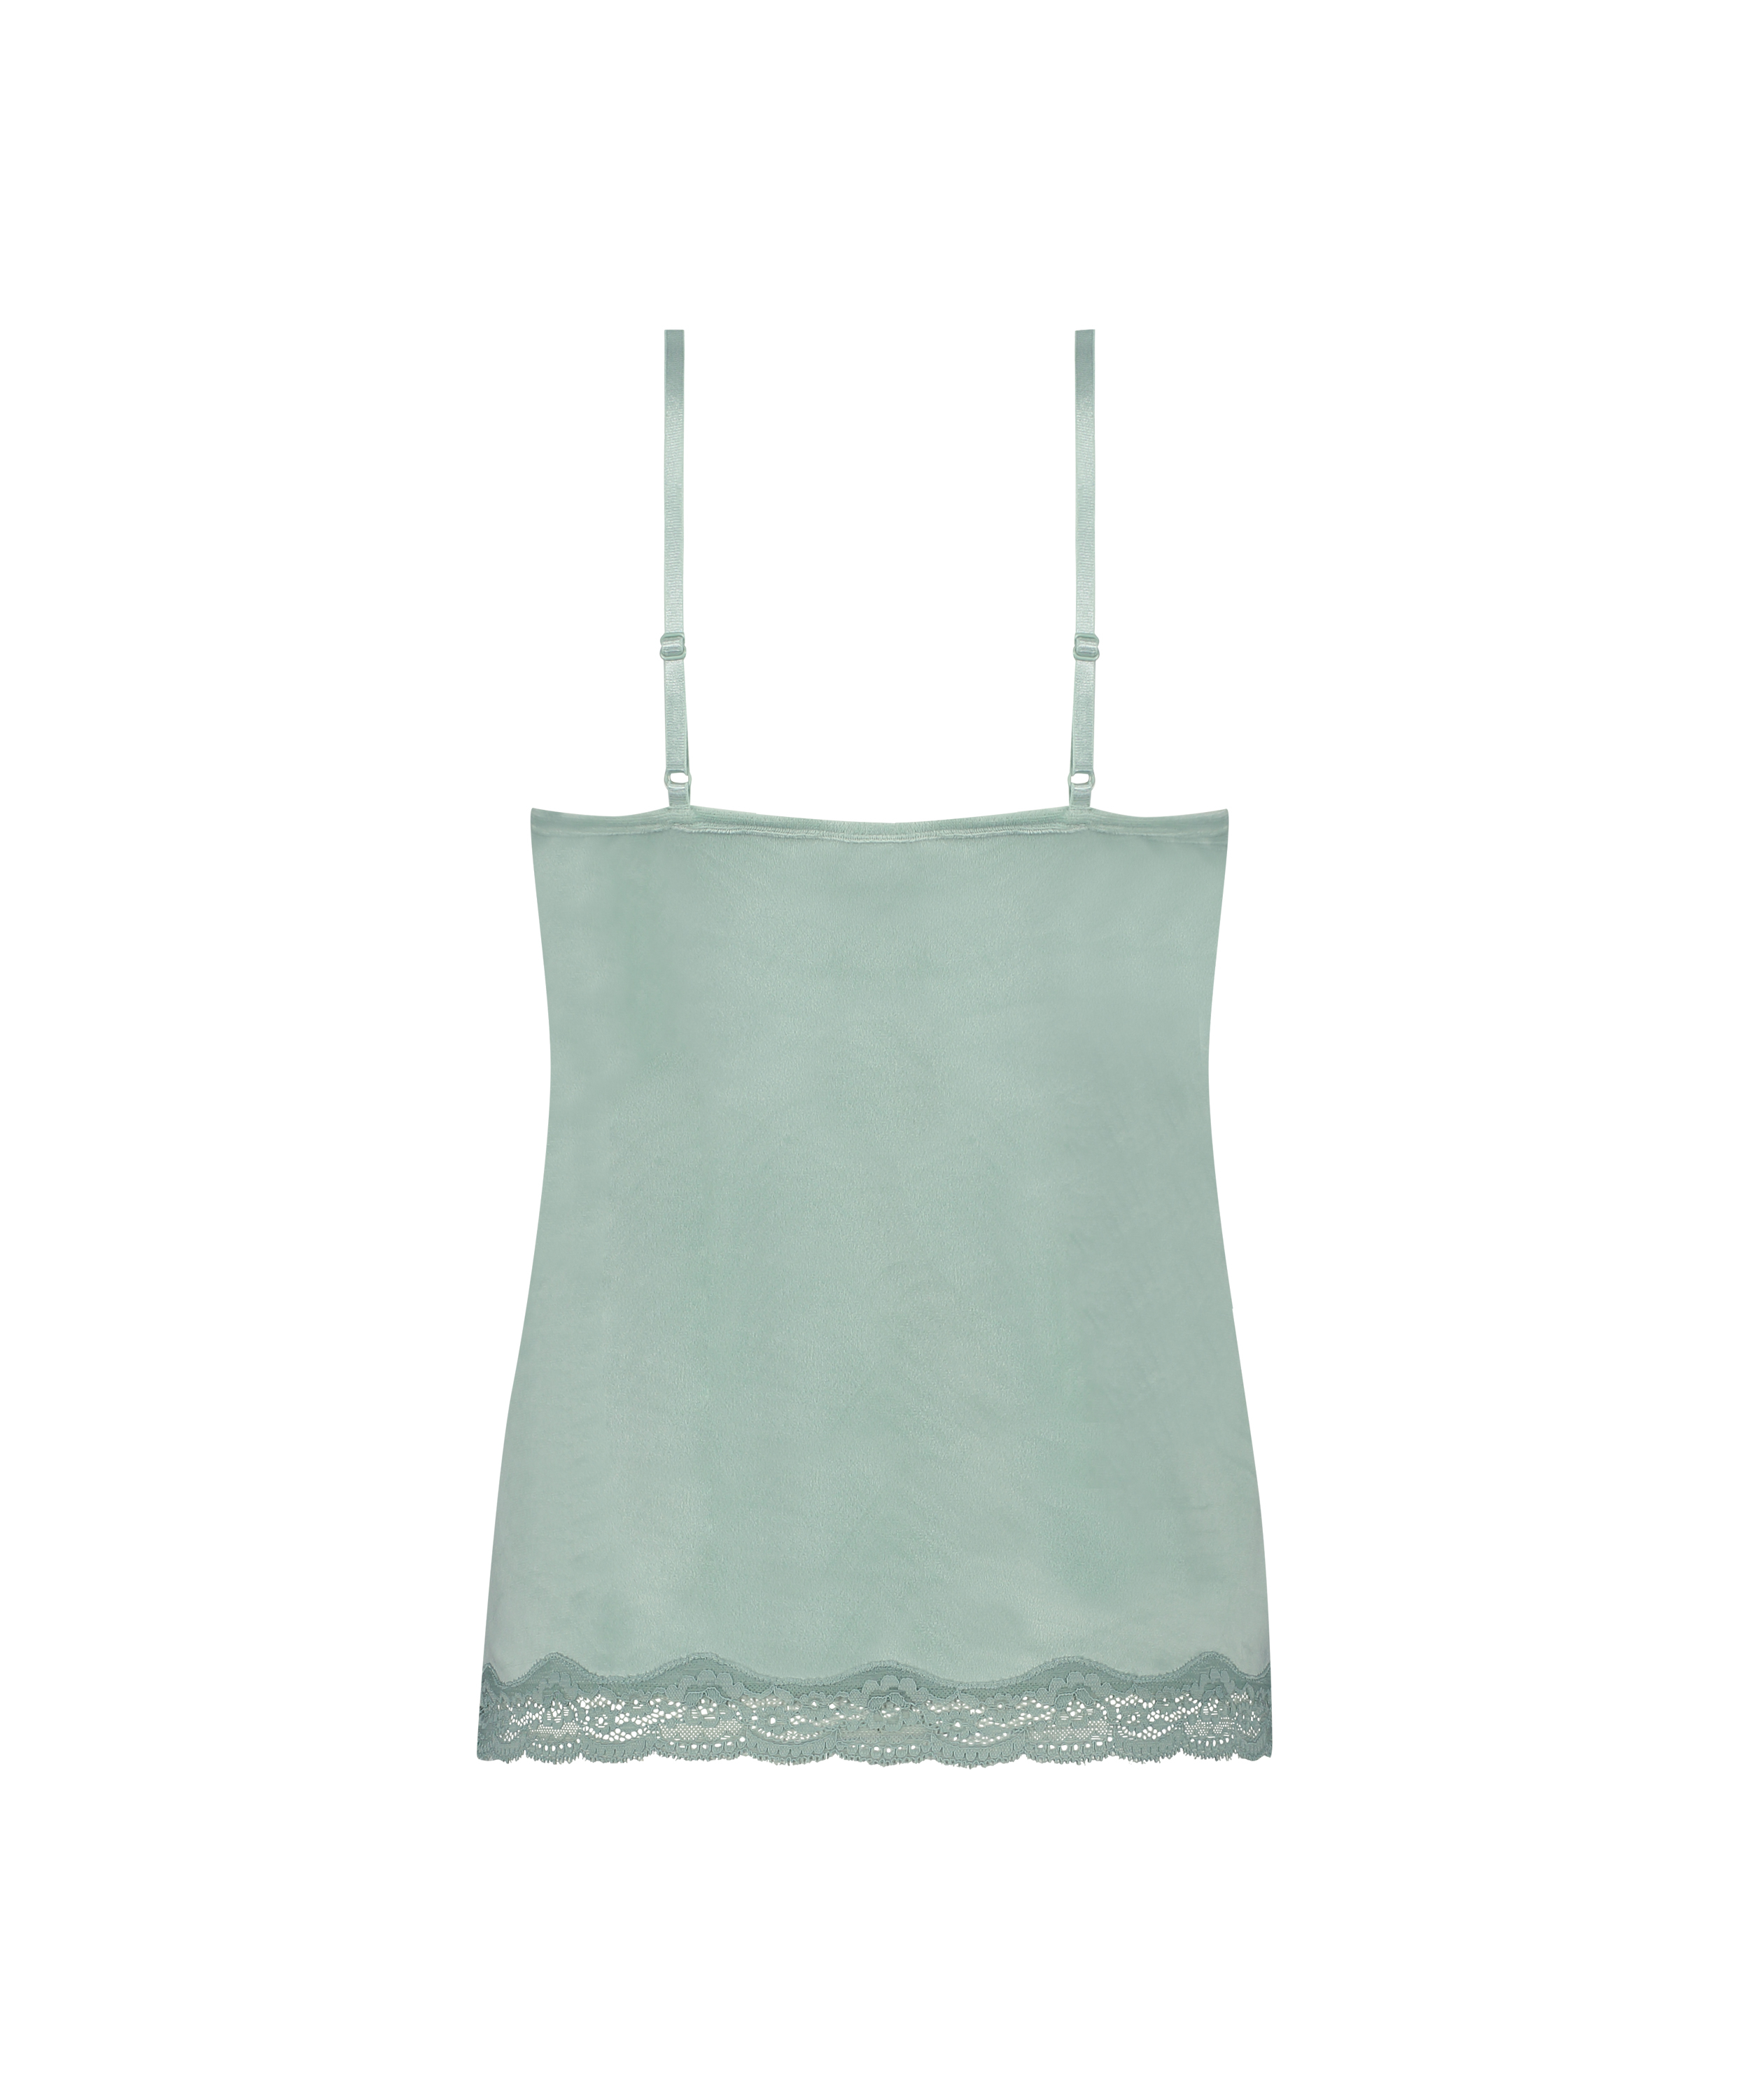 Cami top Velours Lace, Groen, main